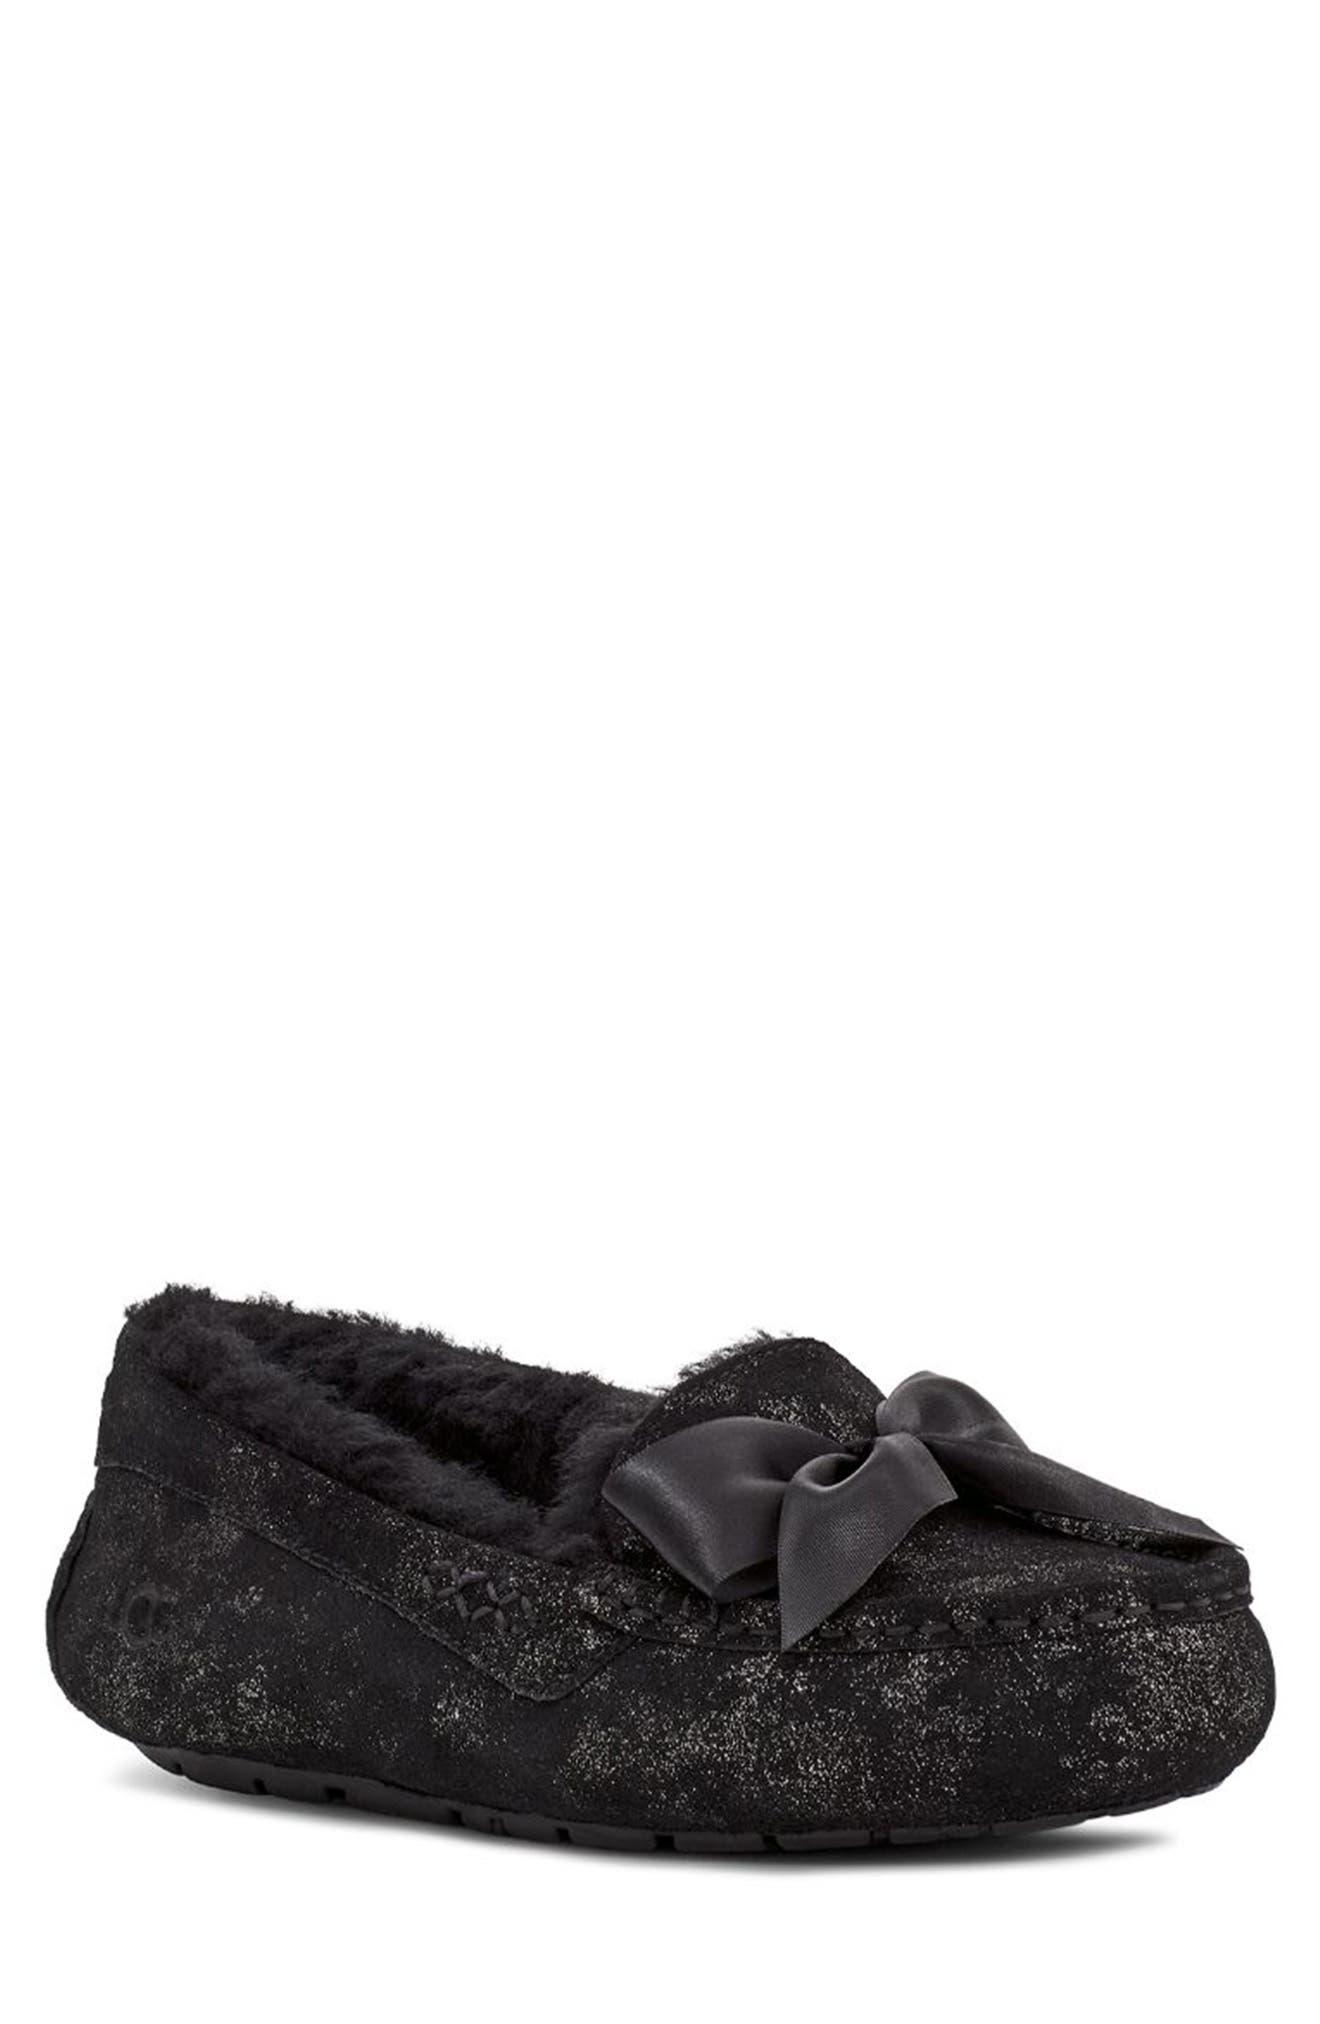 UGG Wool Ansley Bow Glimmer Faux Fur Lined Slipper In Black At 